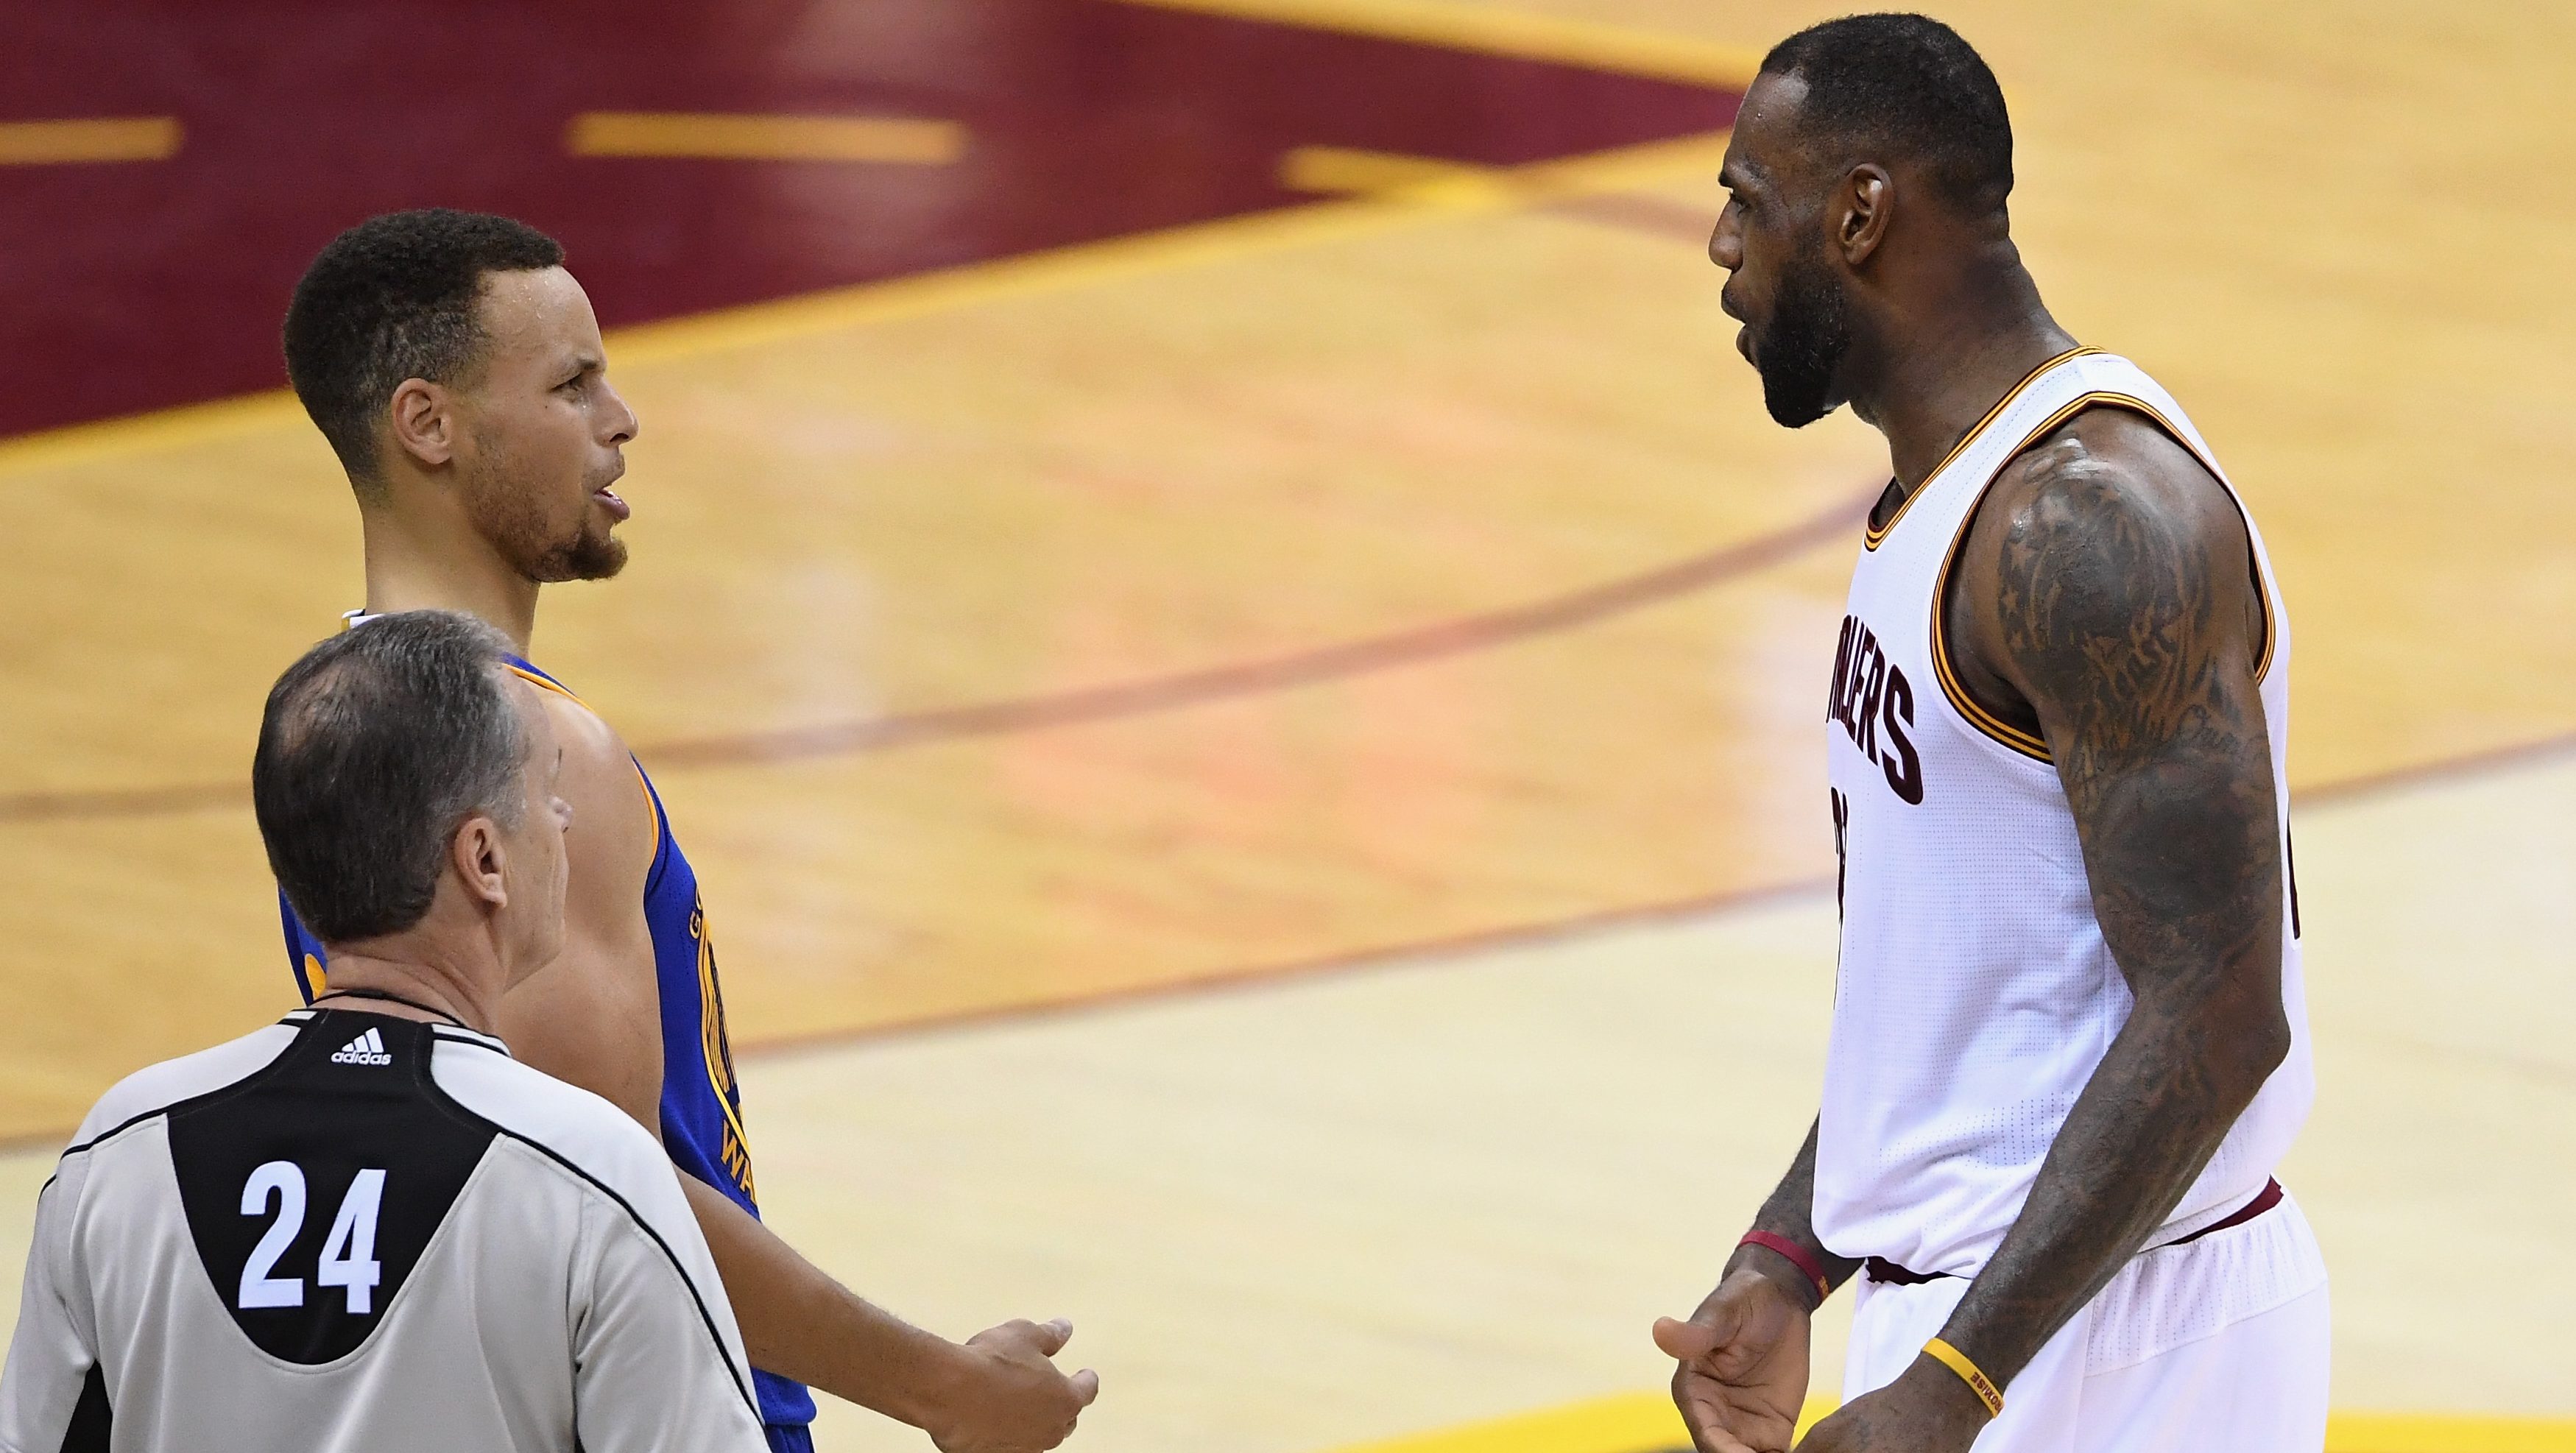 Curry Set For His NBA Finals Moment Against LeBron, Cavs - CBS